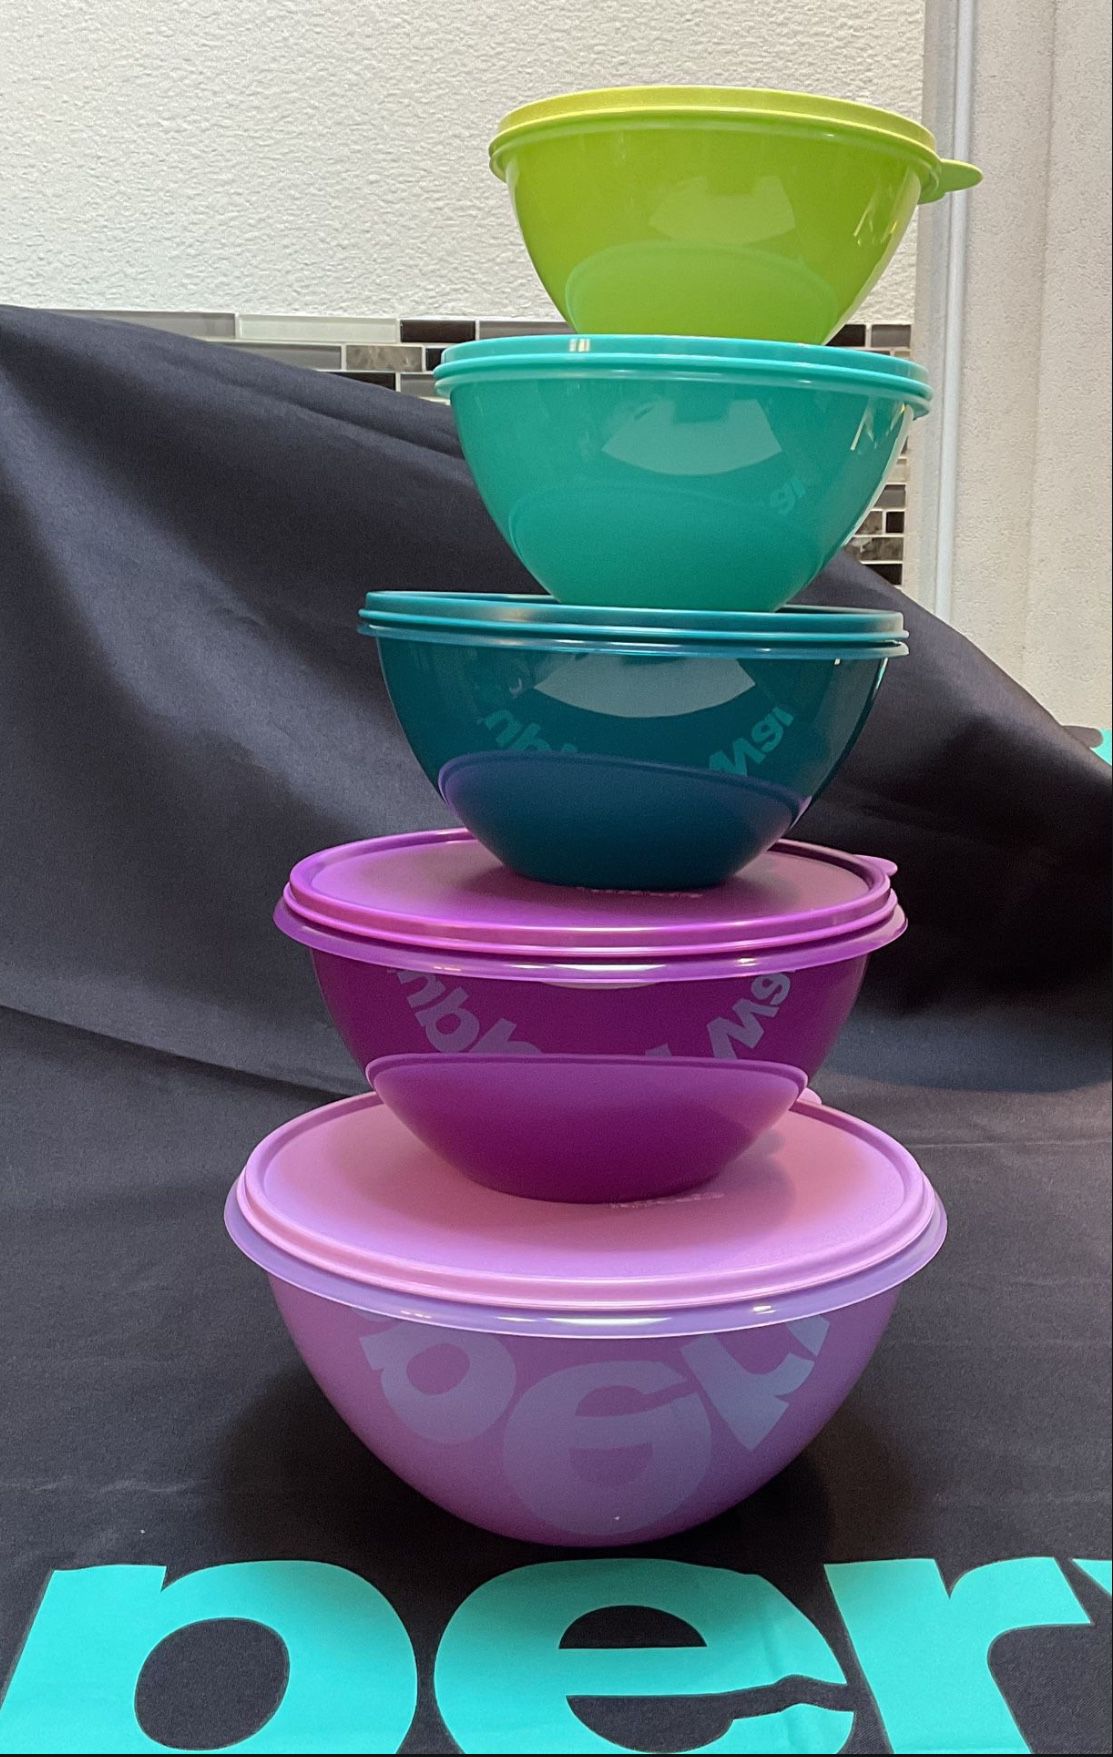 Brand New Tupperware Classic Round Cake Taker With Cariolier Handle 10” for  Sale in Hillsboro, OR - OfferUp